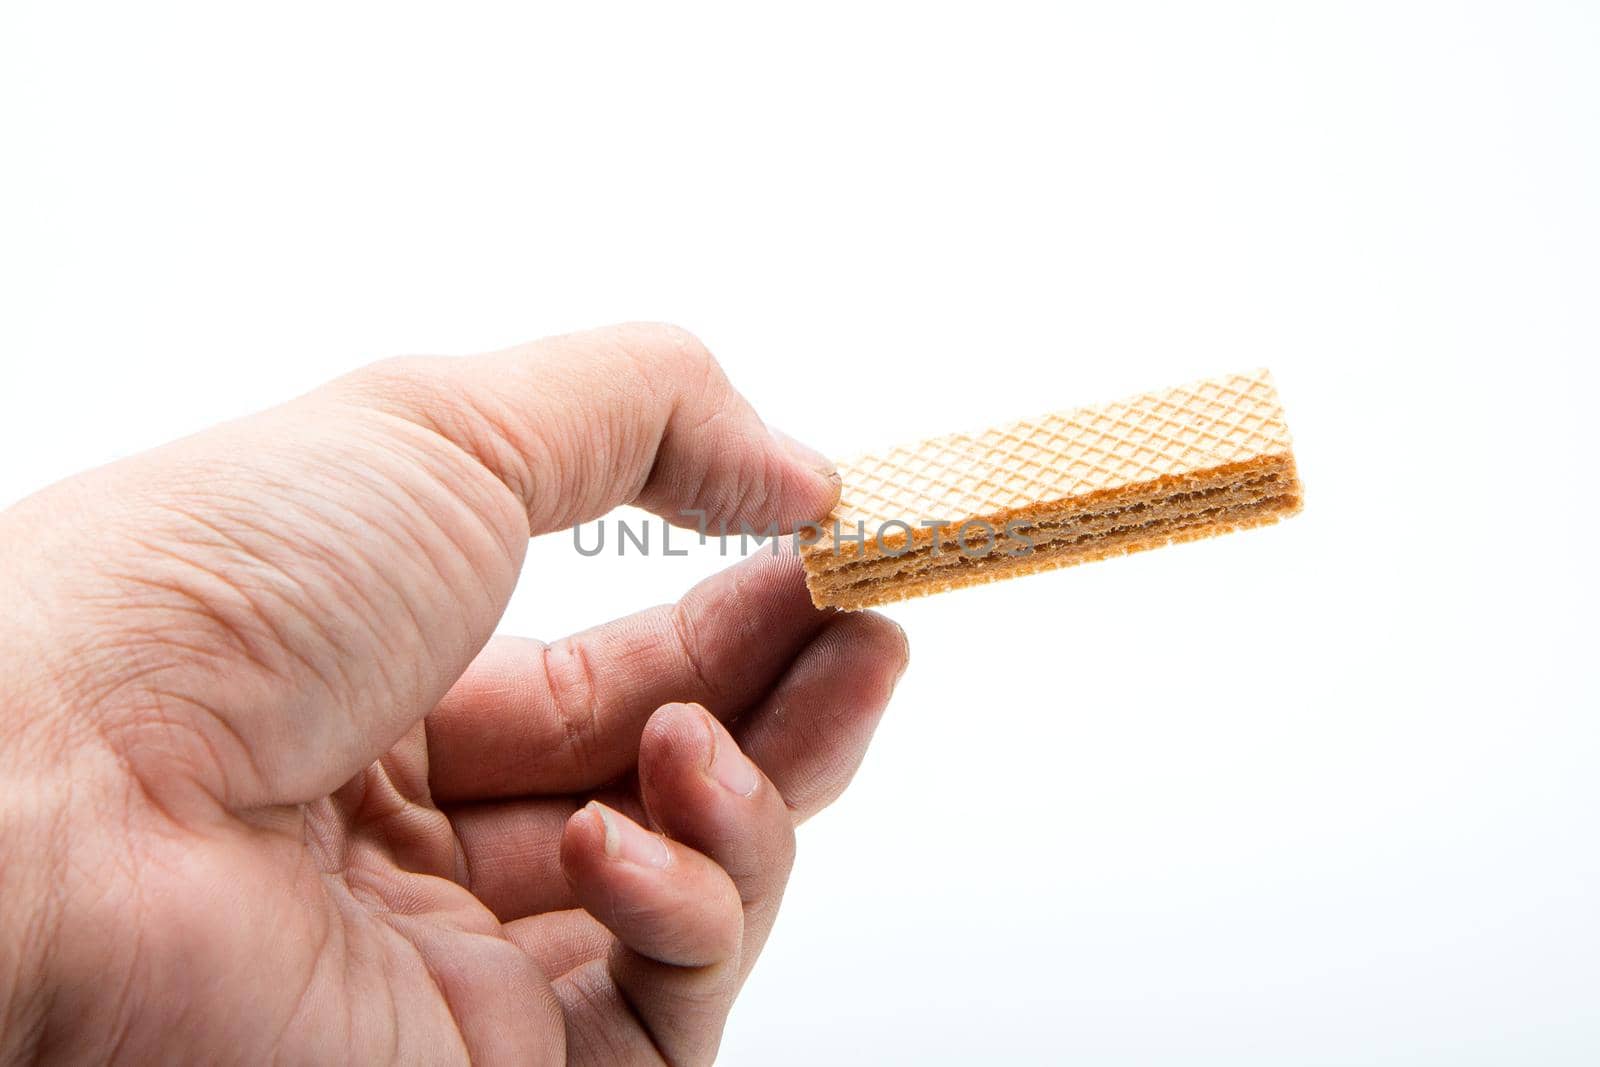 Hand holding a delicious wafer.